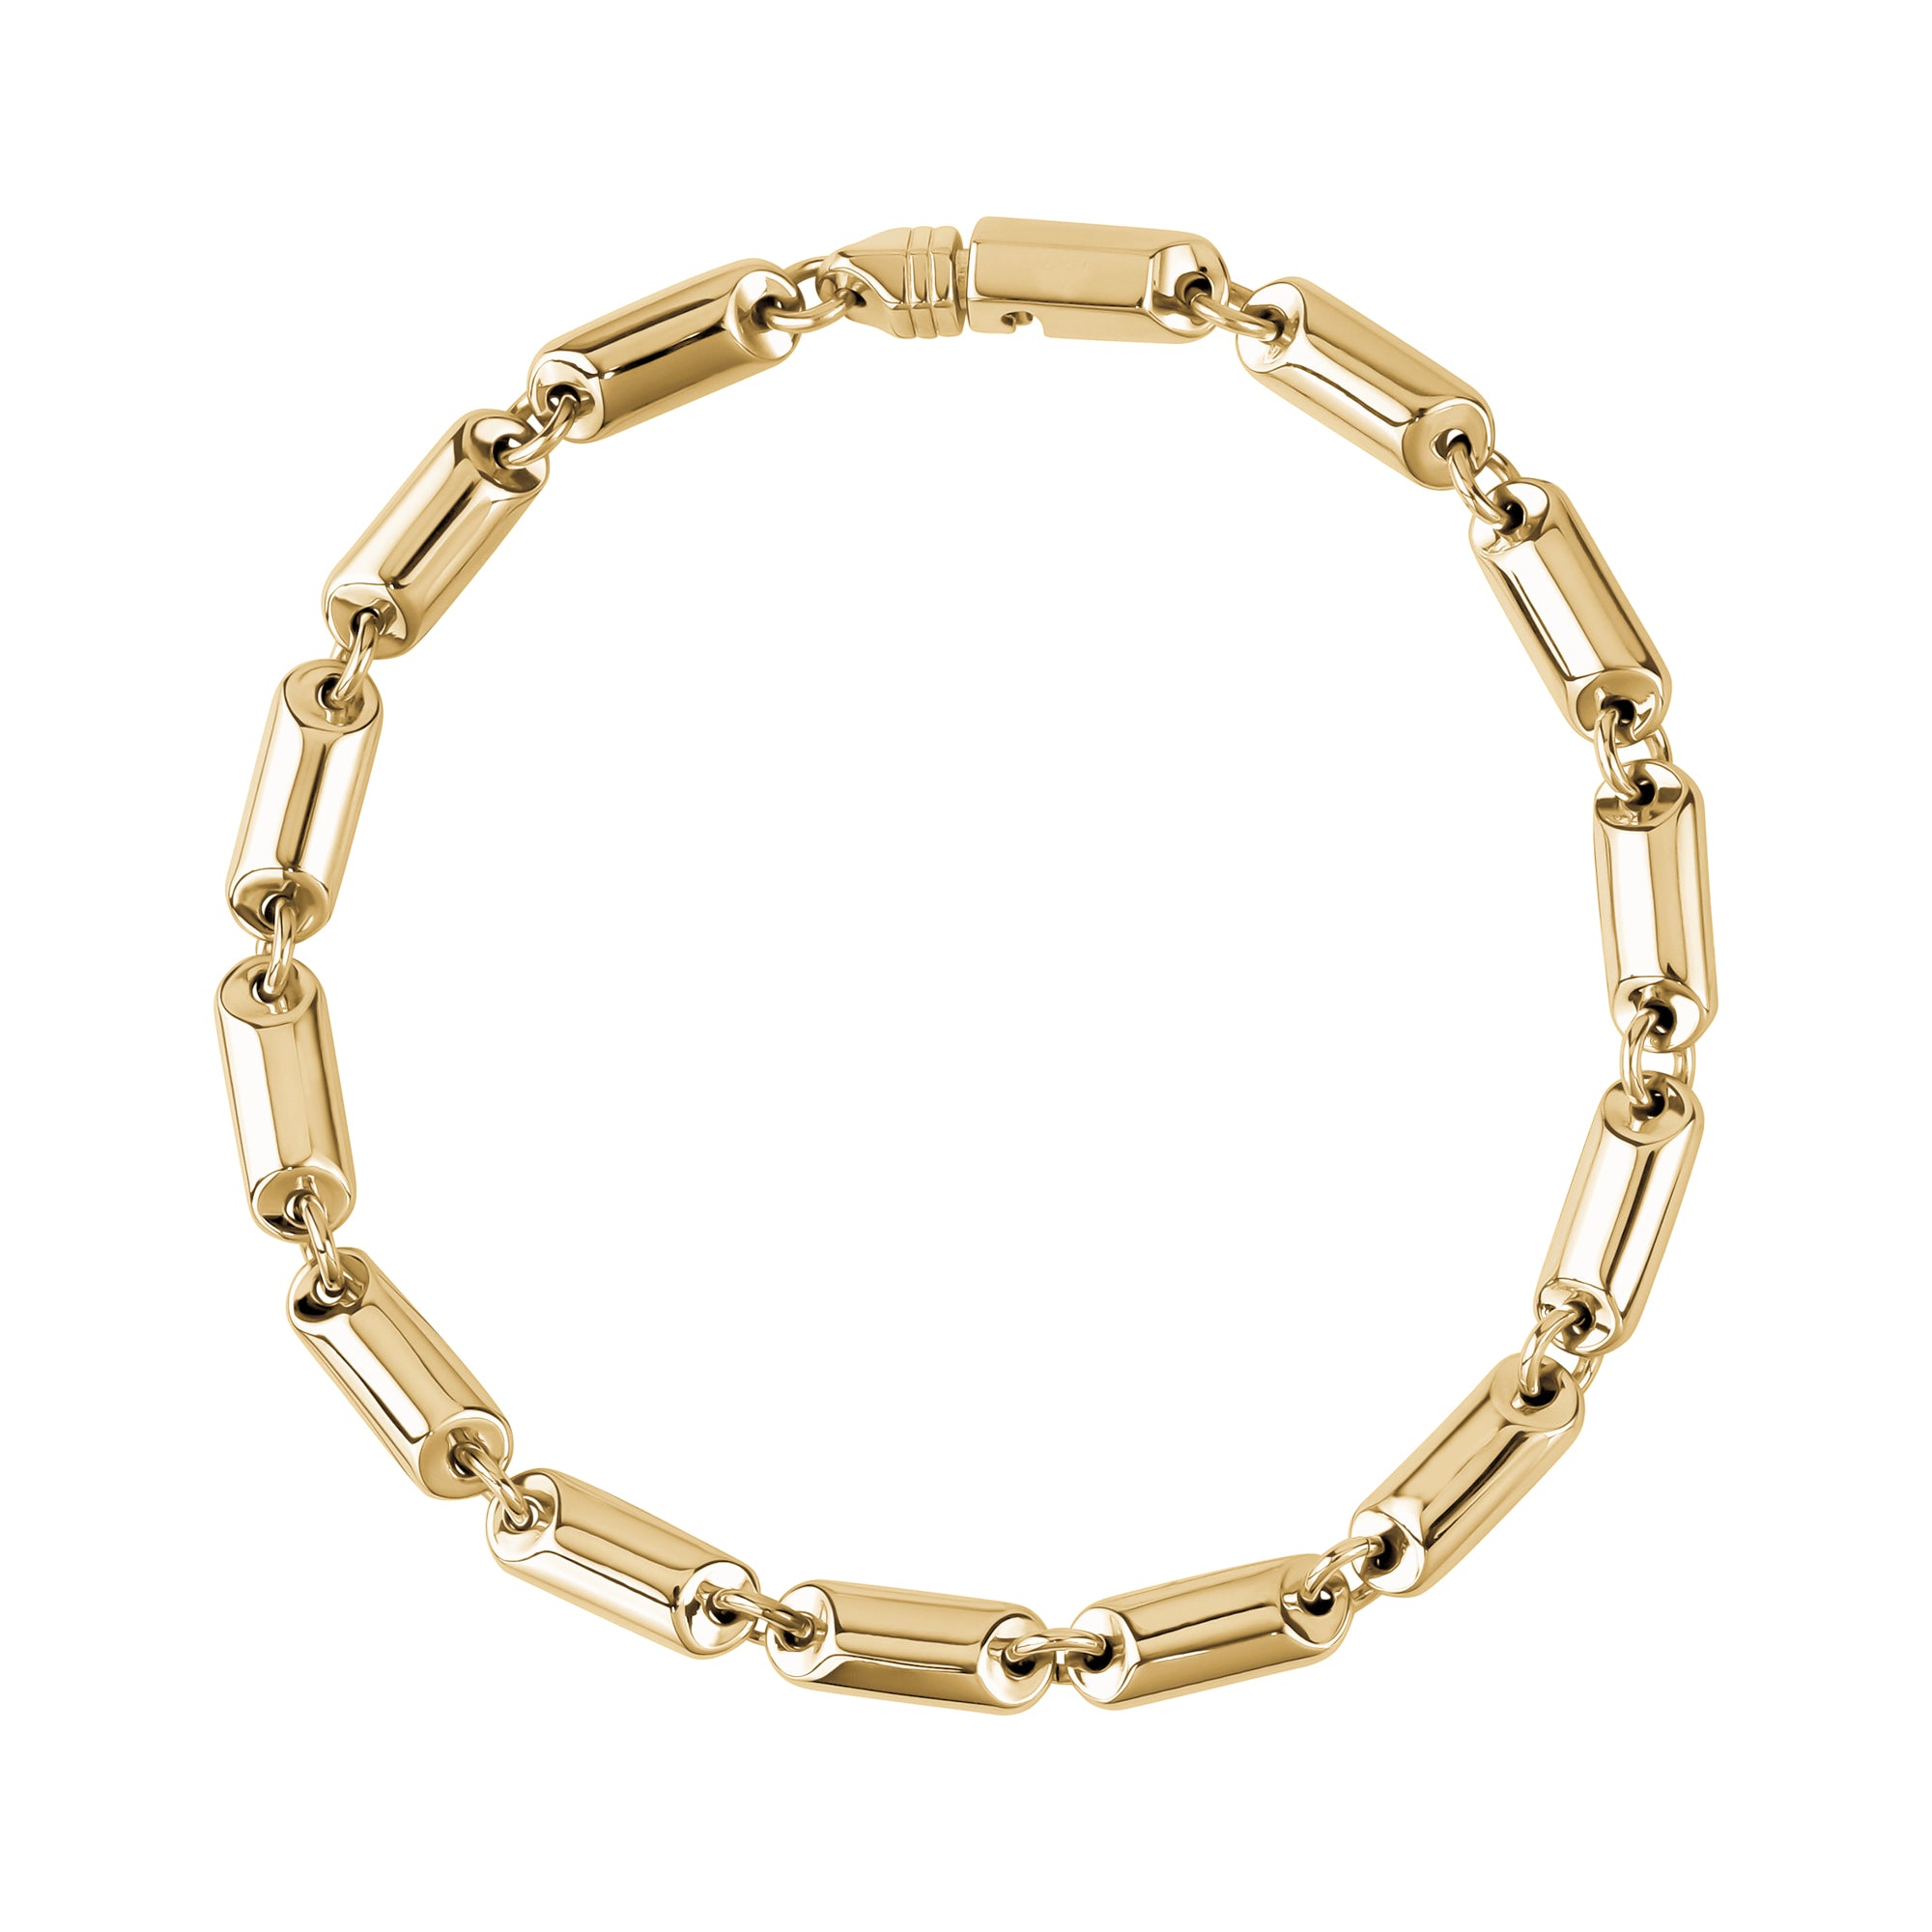 Buy Daily Brass 22K Gold Plated Stylish Cable Link Chain Bracelet for Men  Boys Online In India At Discounted Prices